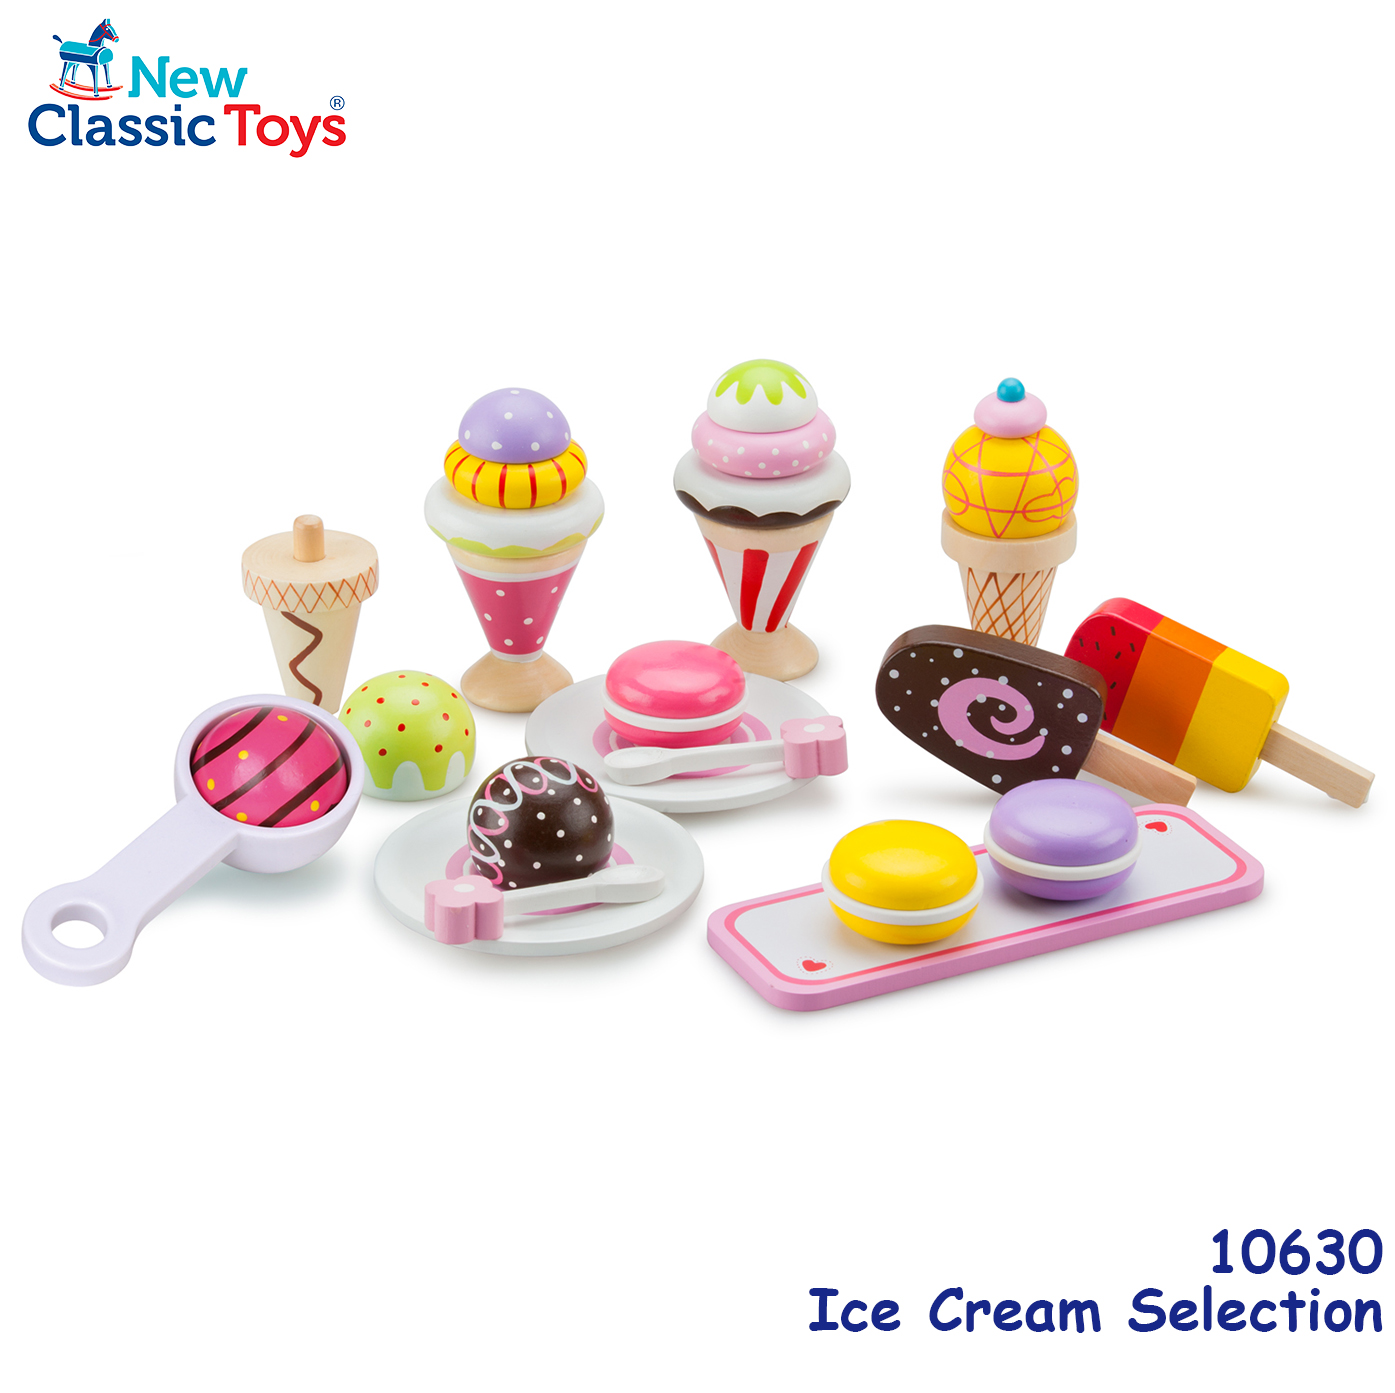 10630_New Classic Toys